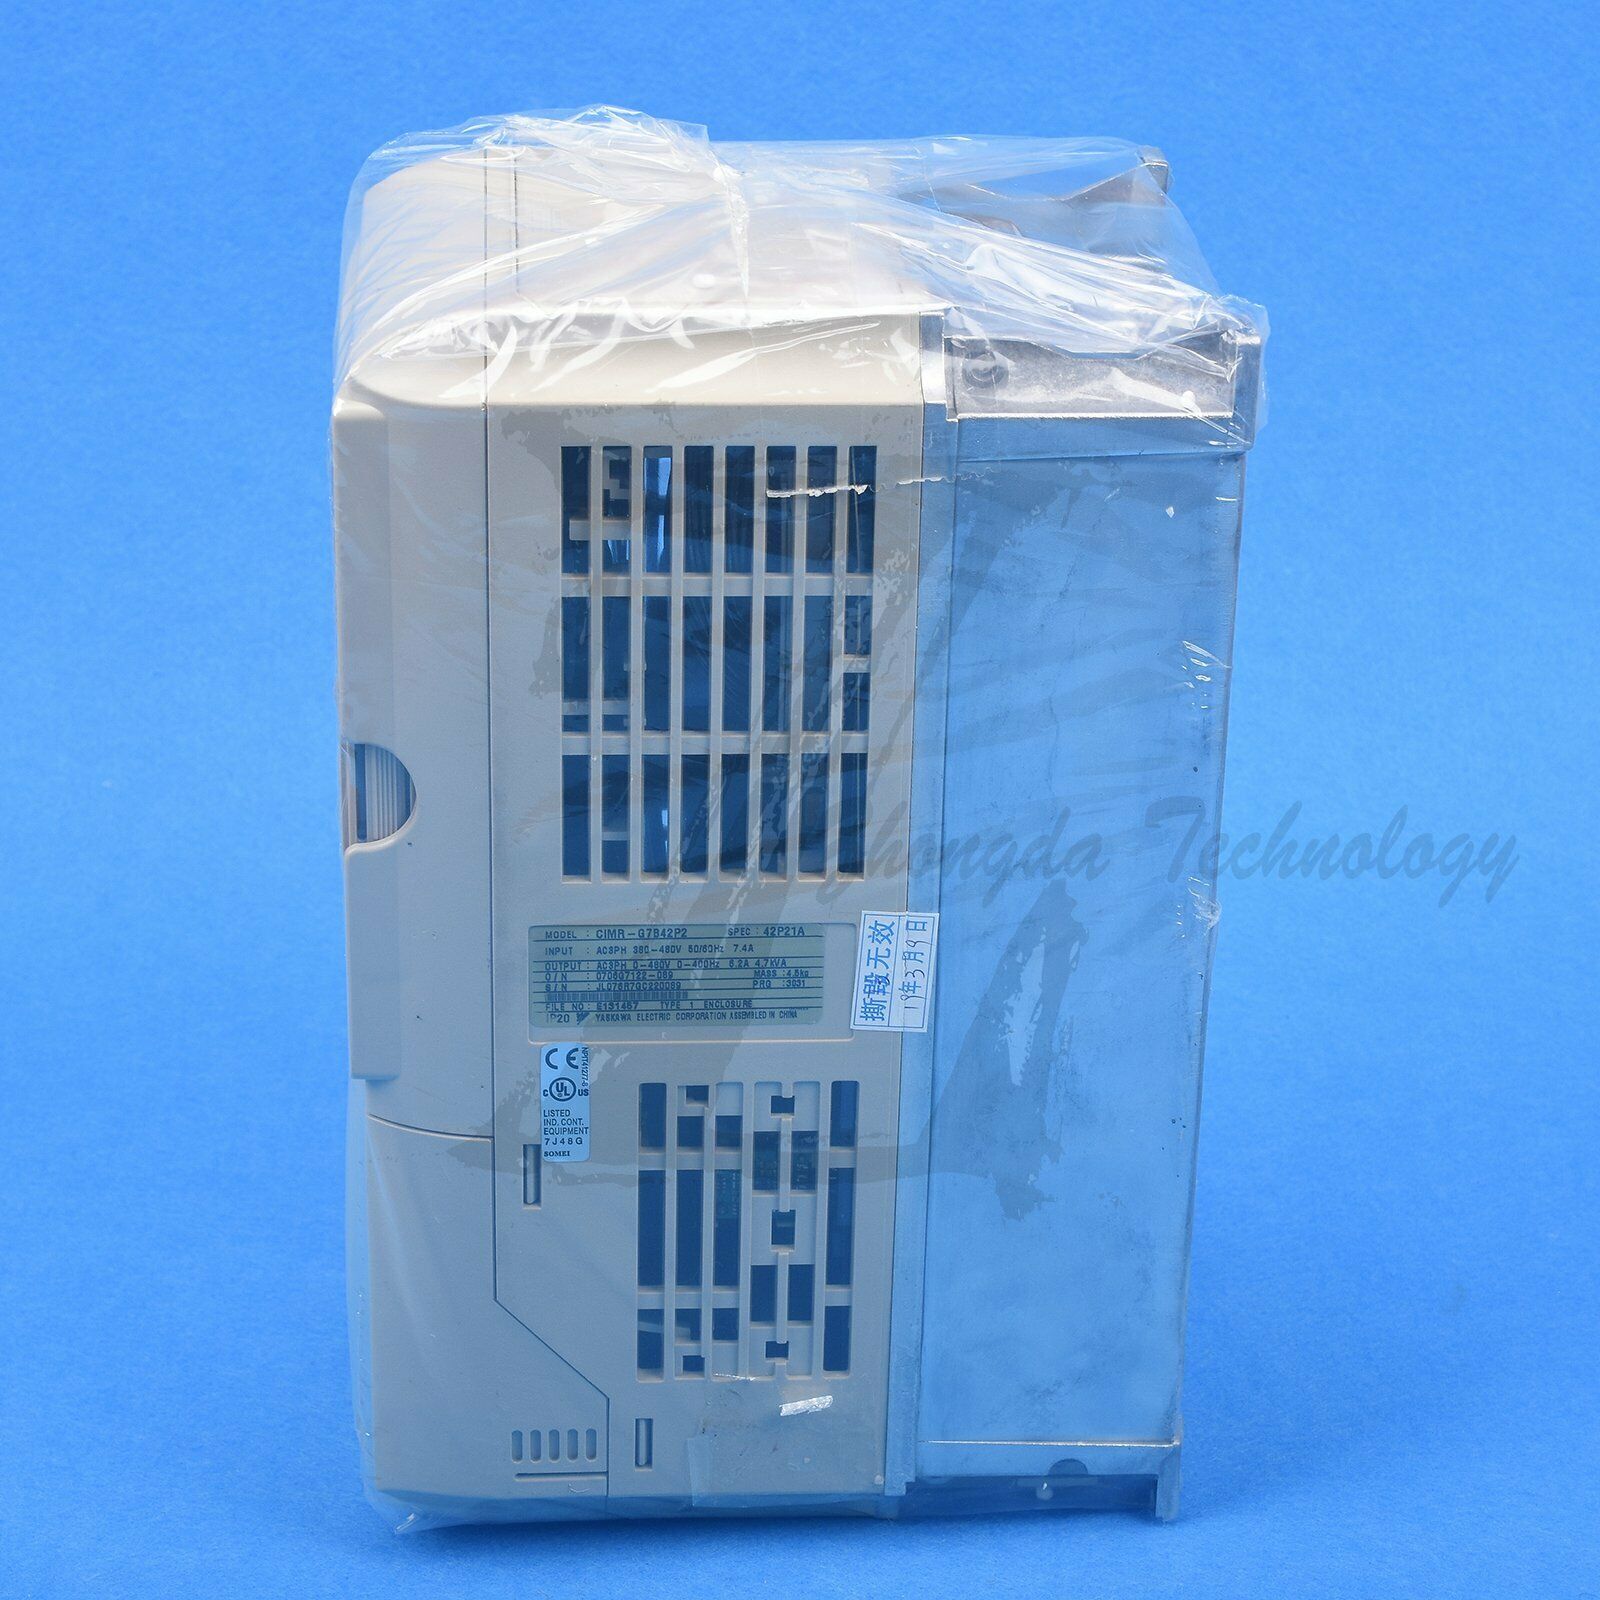 Used Yaskawa inverter CIMR-G7B42P2 Tested in good condition Send